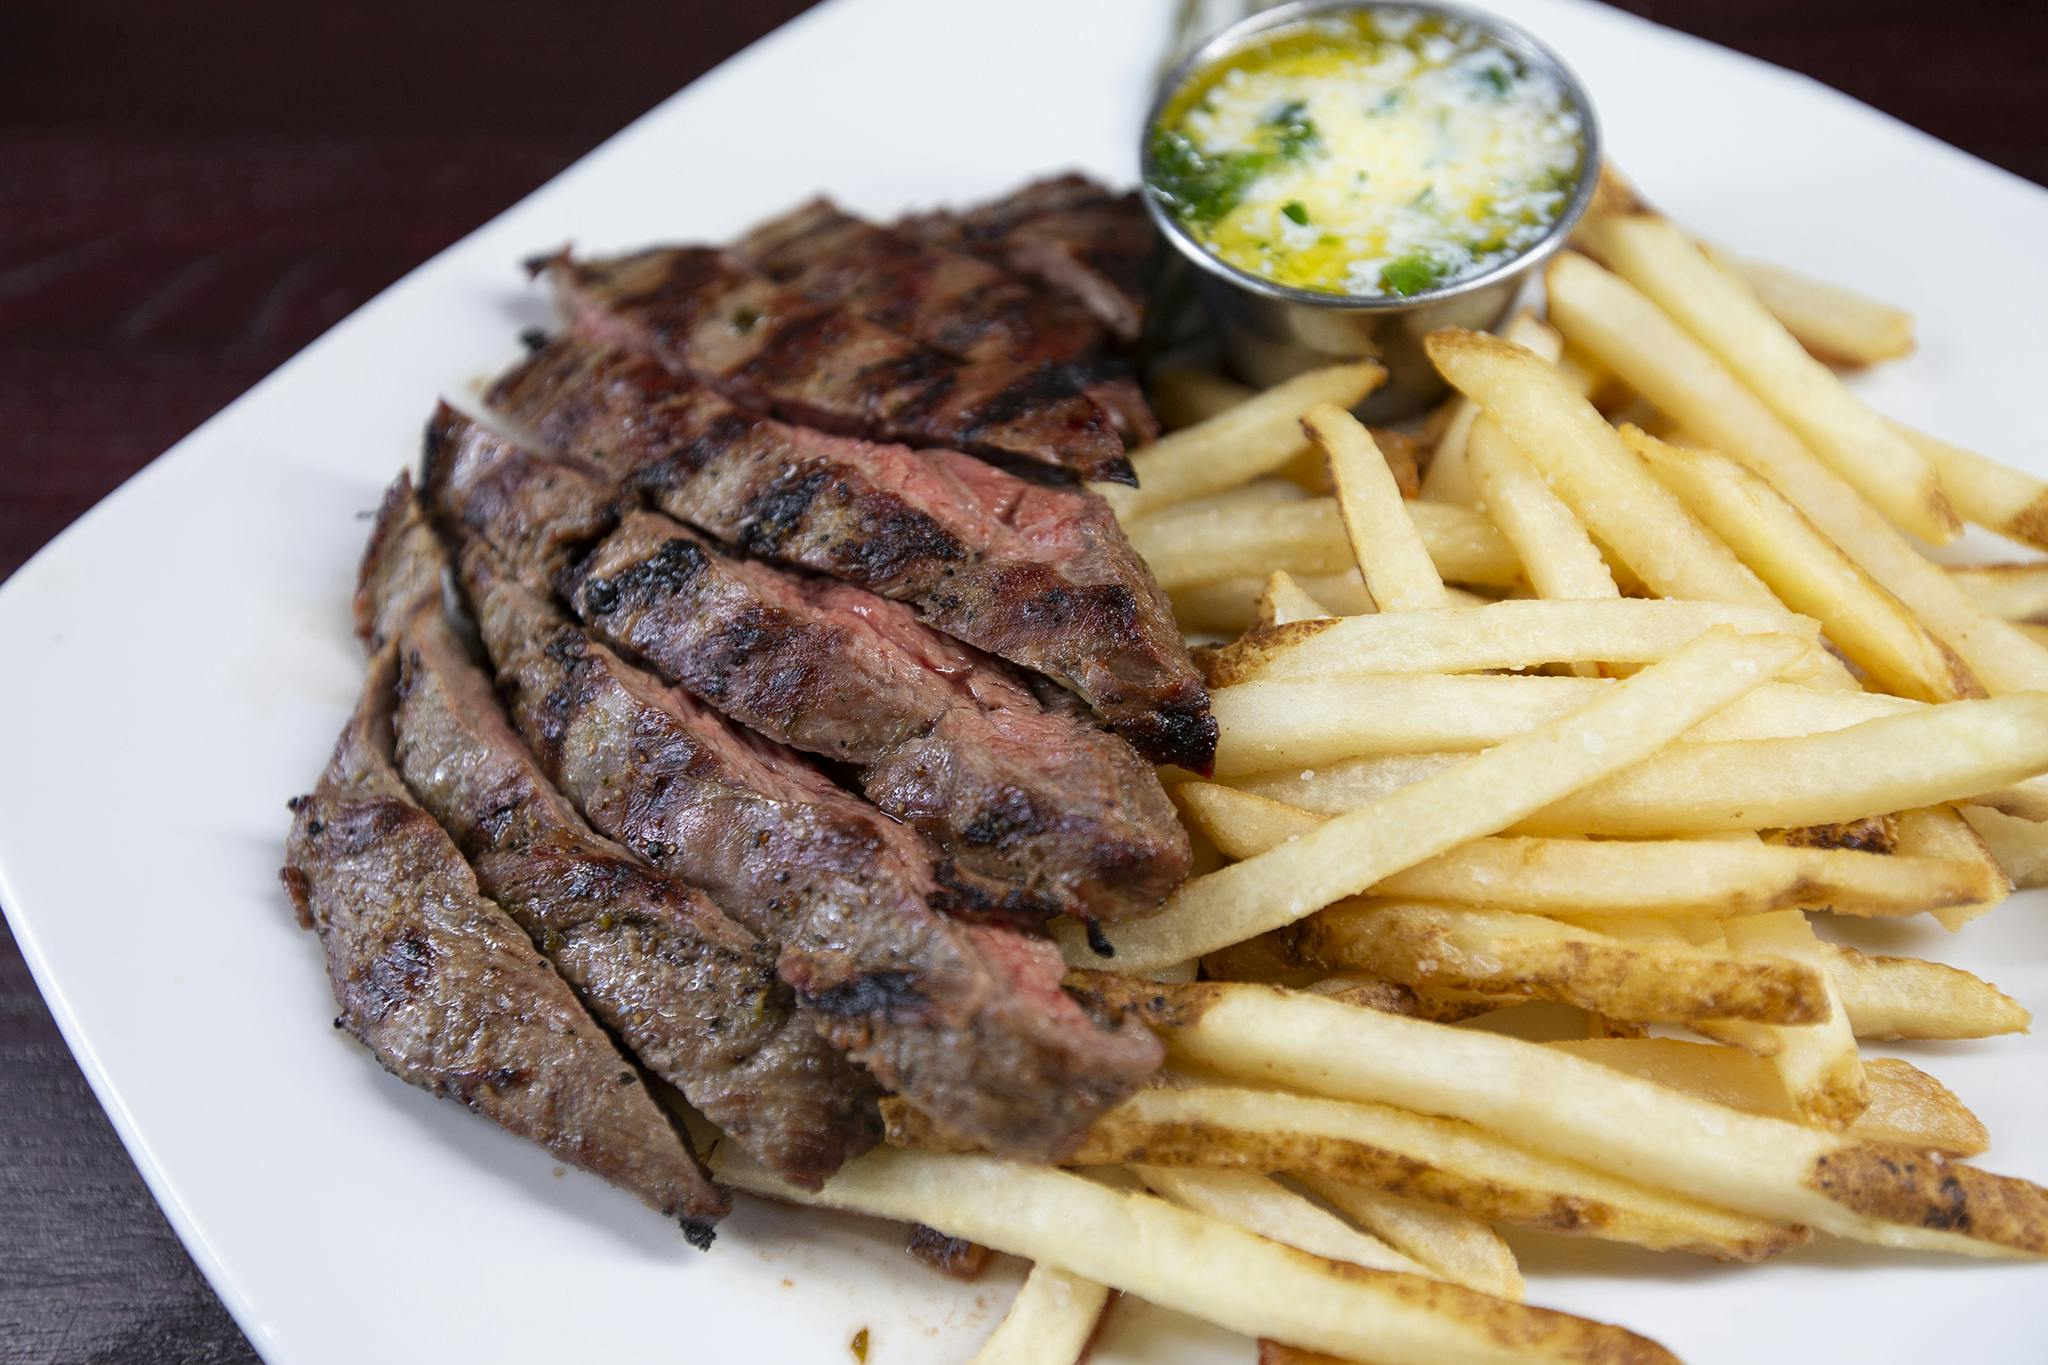 Steak N' Fries. from Firehouse Grill - Chicago Ave in Evanston, IL